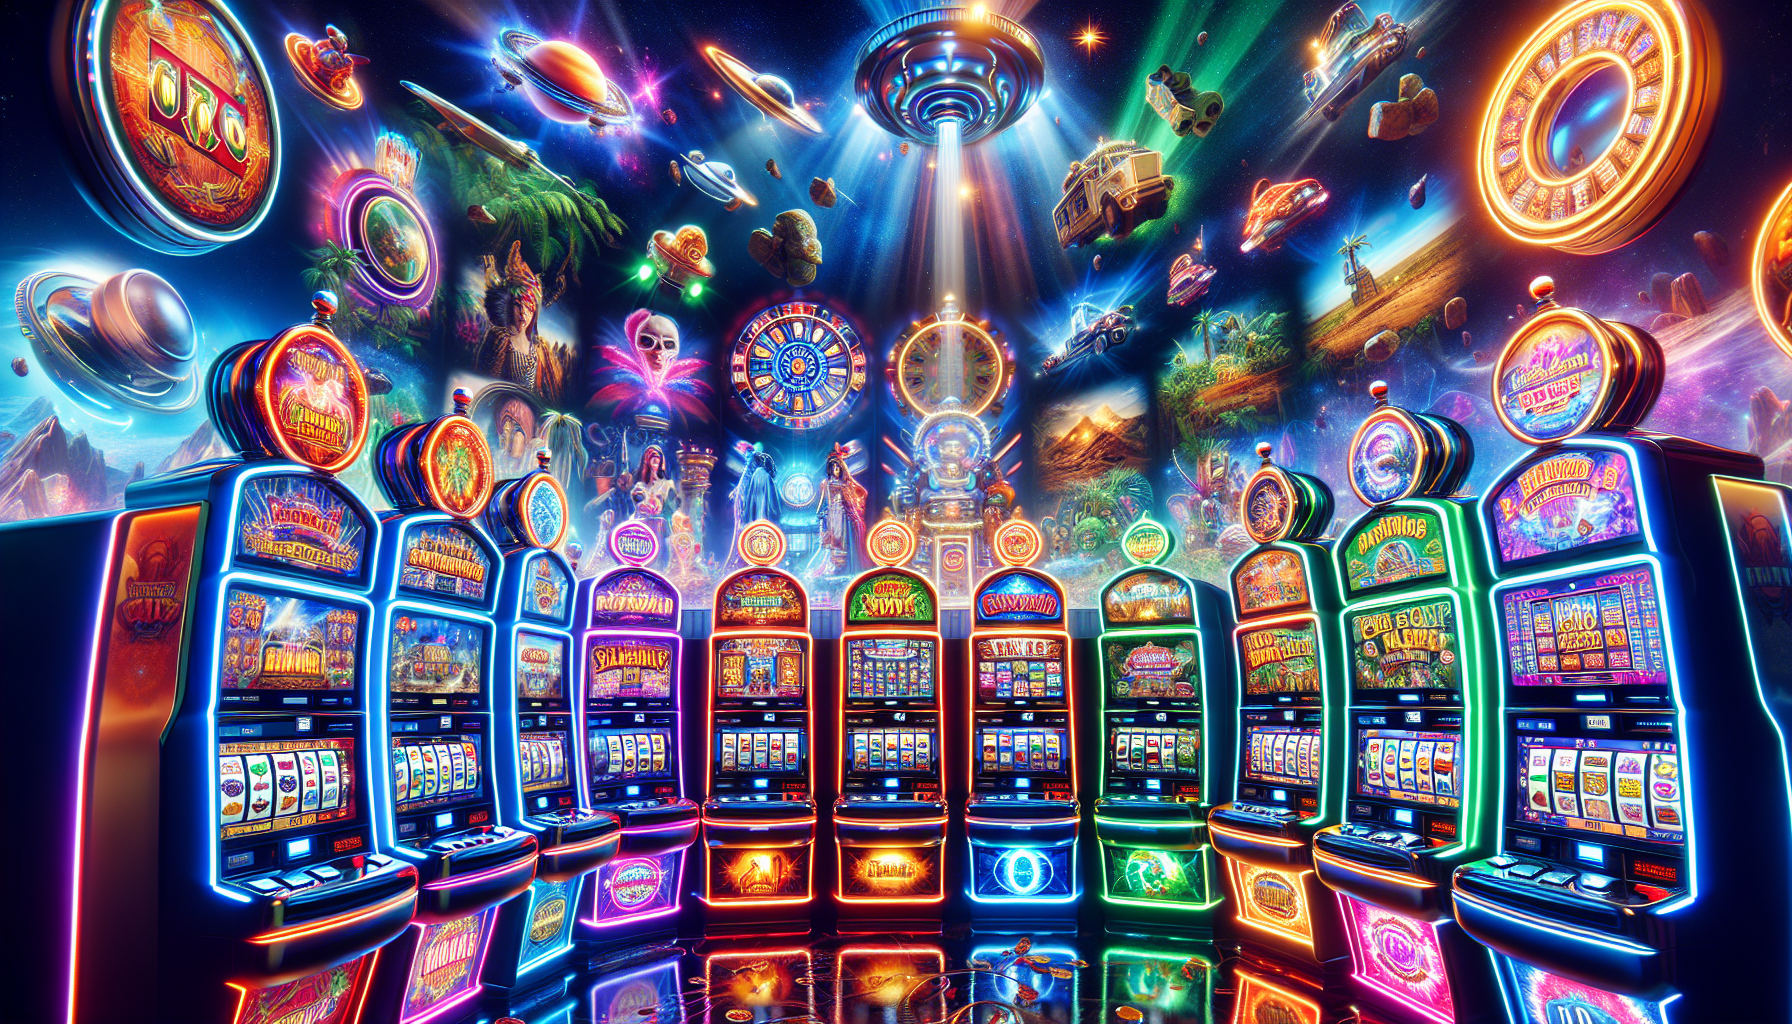 Illustration of colorful slot machines in an online casino